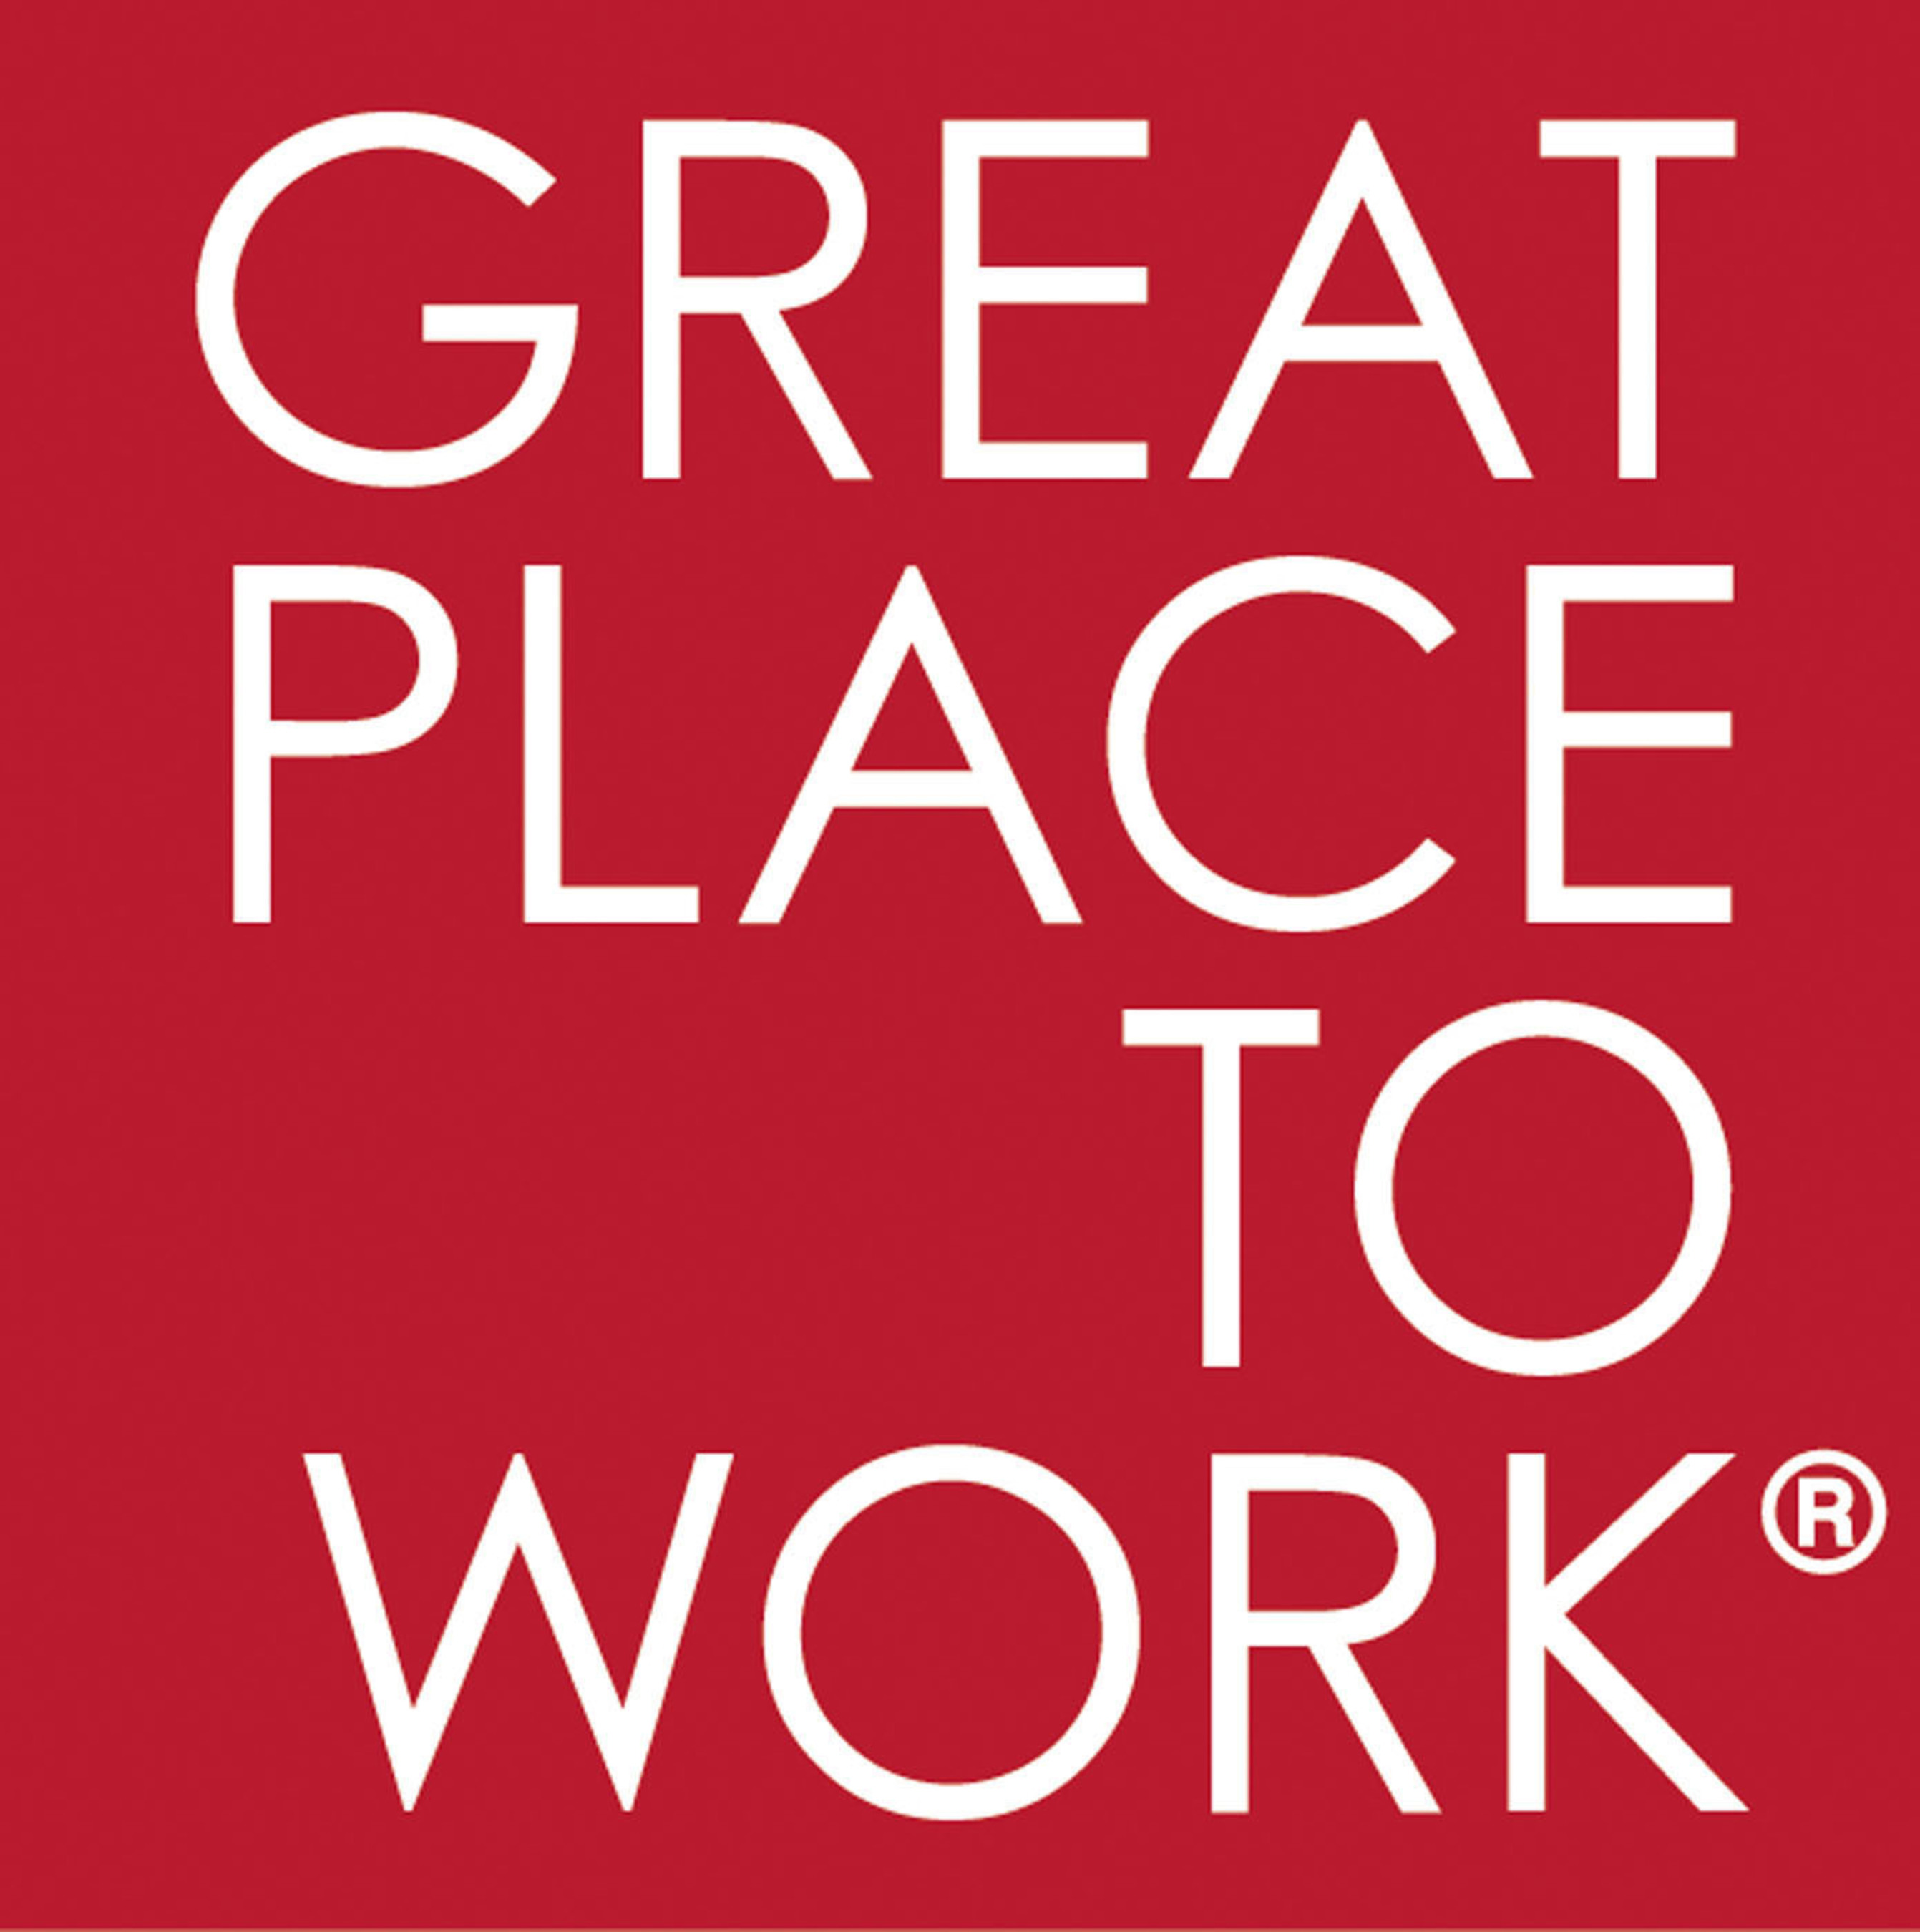 Great Place to Work® Announces Strategic Reorganization of